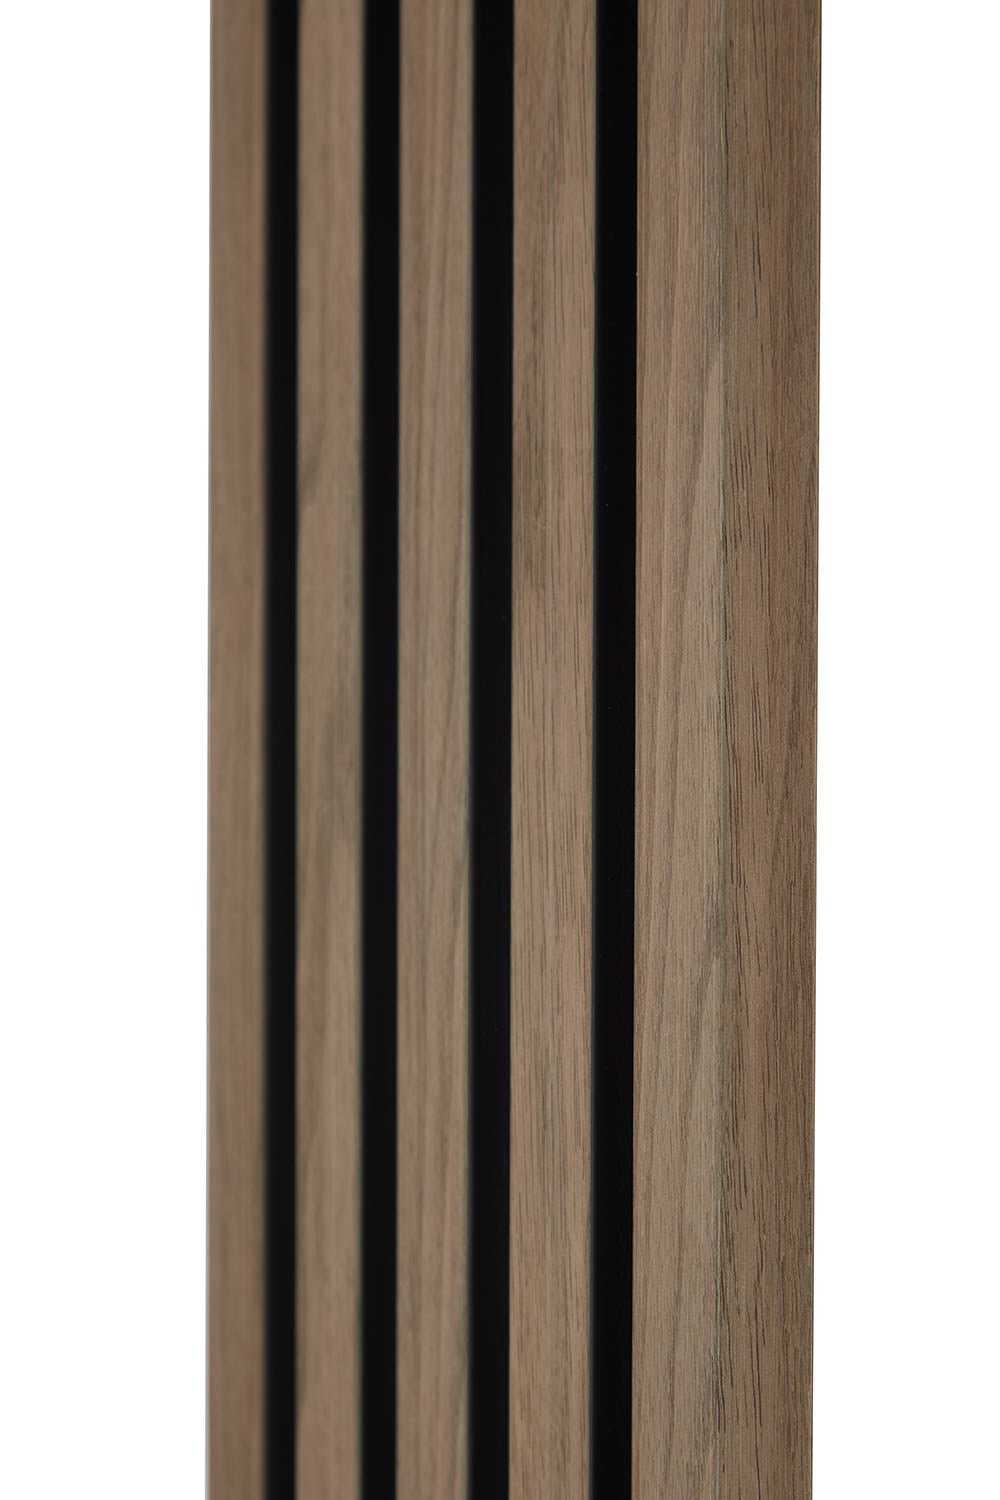 Walnut and Black SlatWall end cap from close up, showing groove and texture.